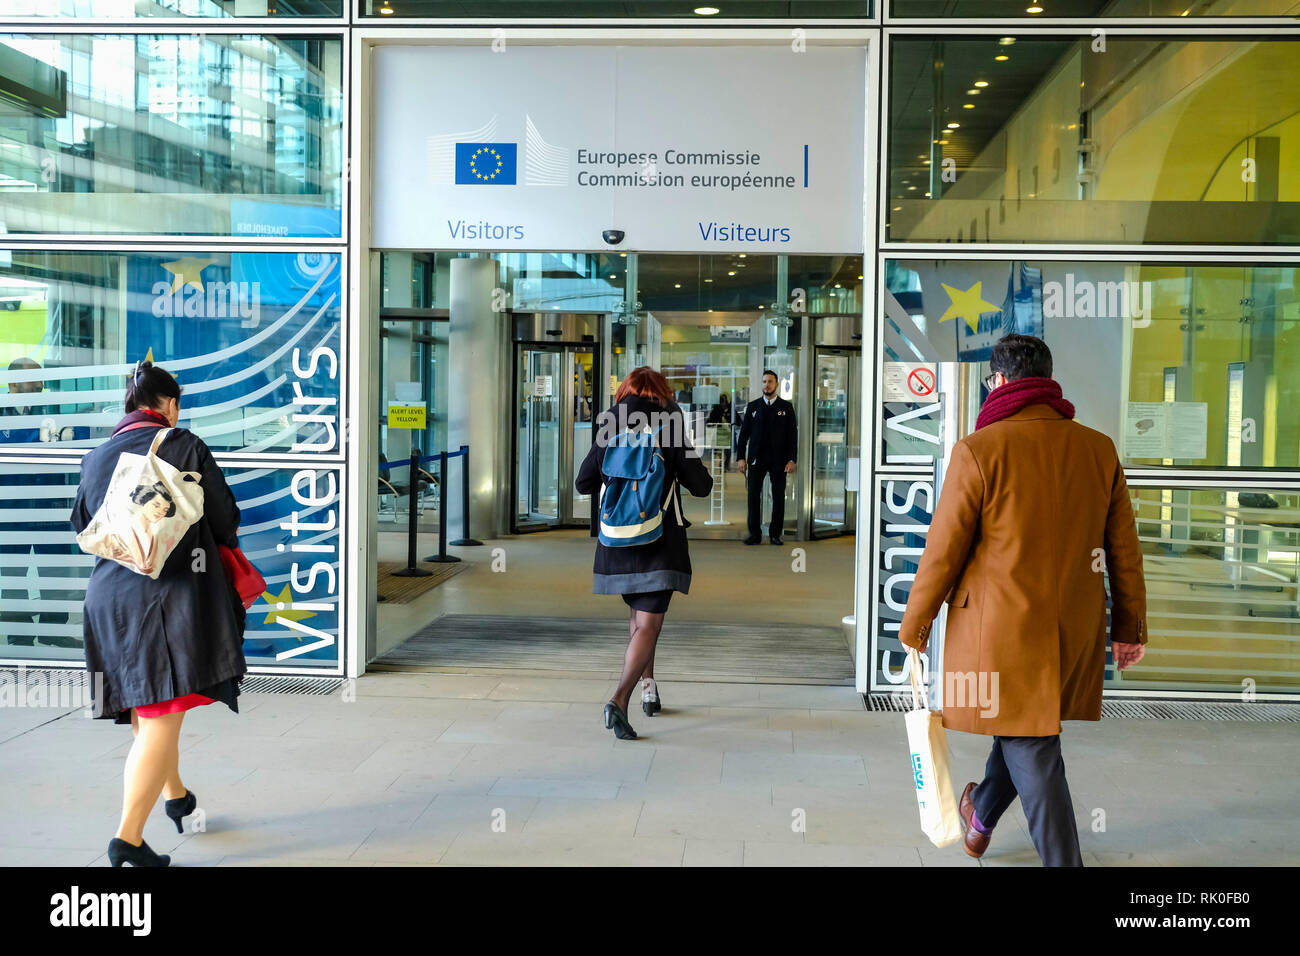 Brussels, Belgium - Visitor's entrance to the building of the European Commission, the Palais Berlaymont, in Brussels, Brüssel, Belgien - Besuchereing Stock Photo